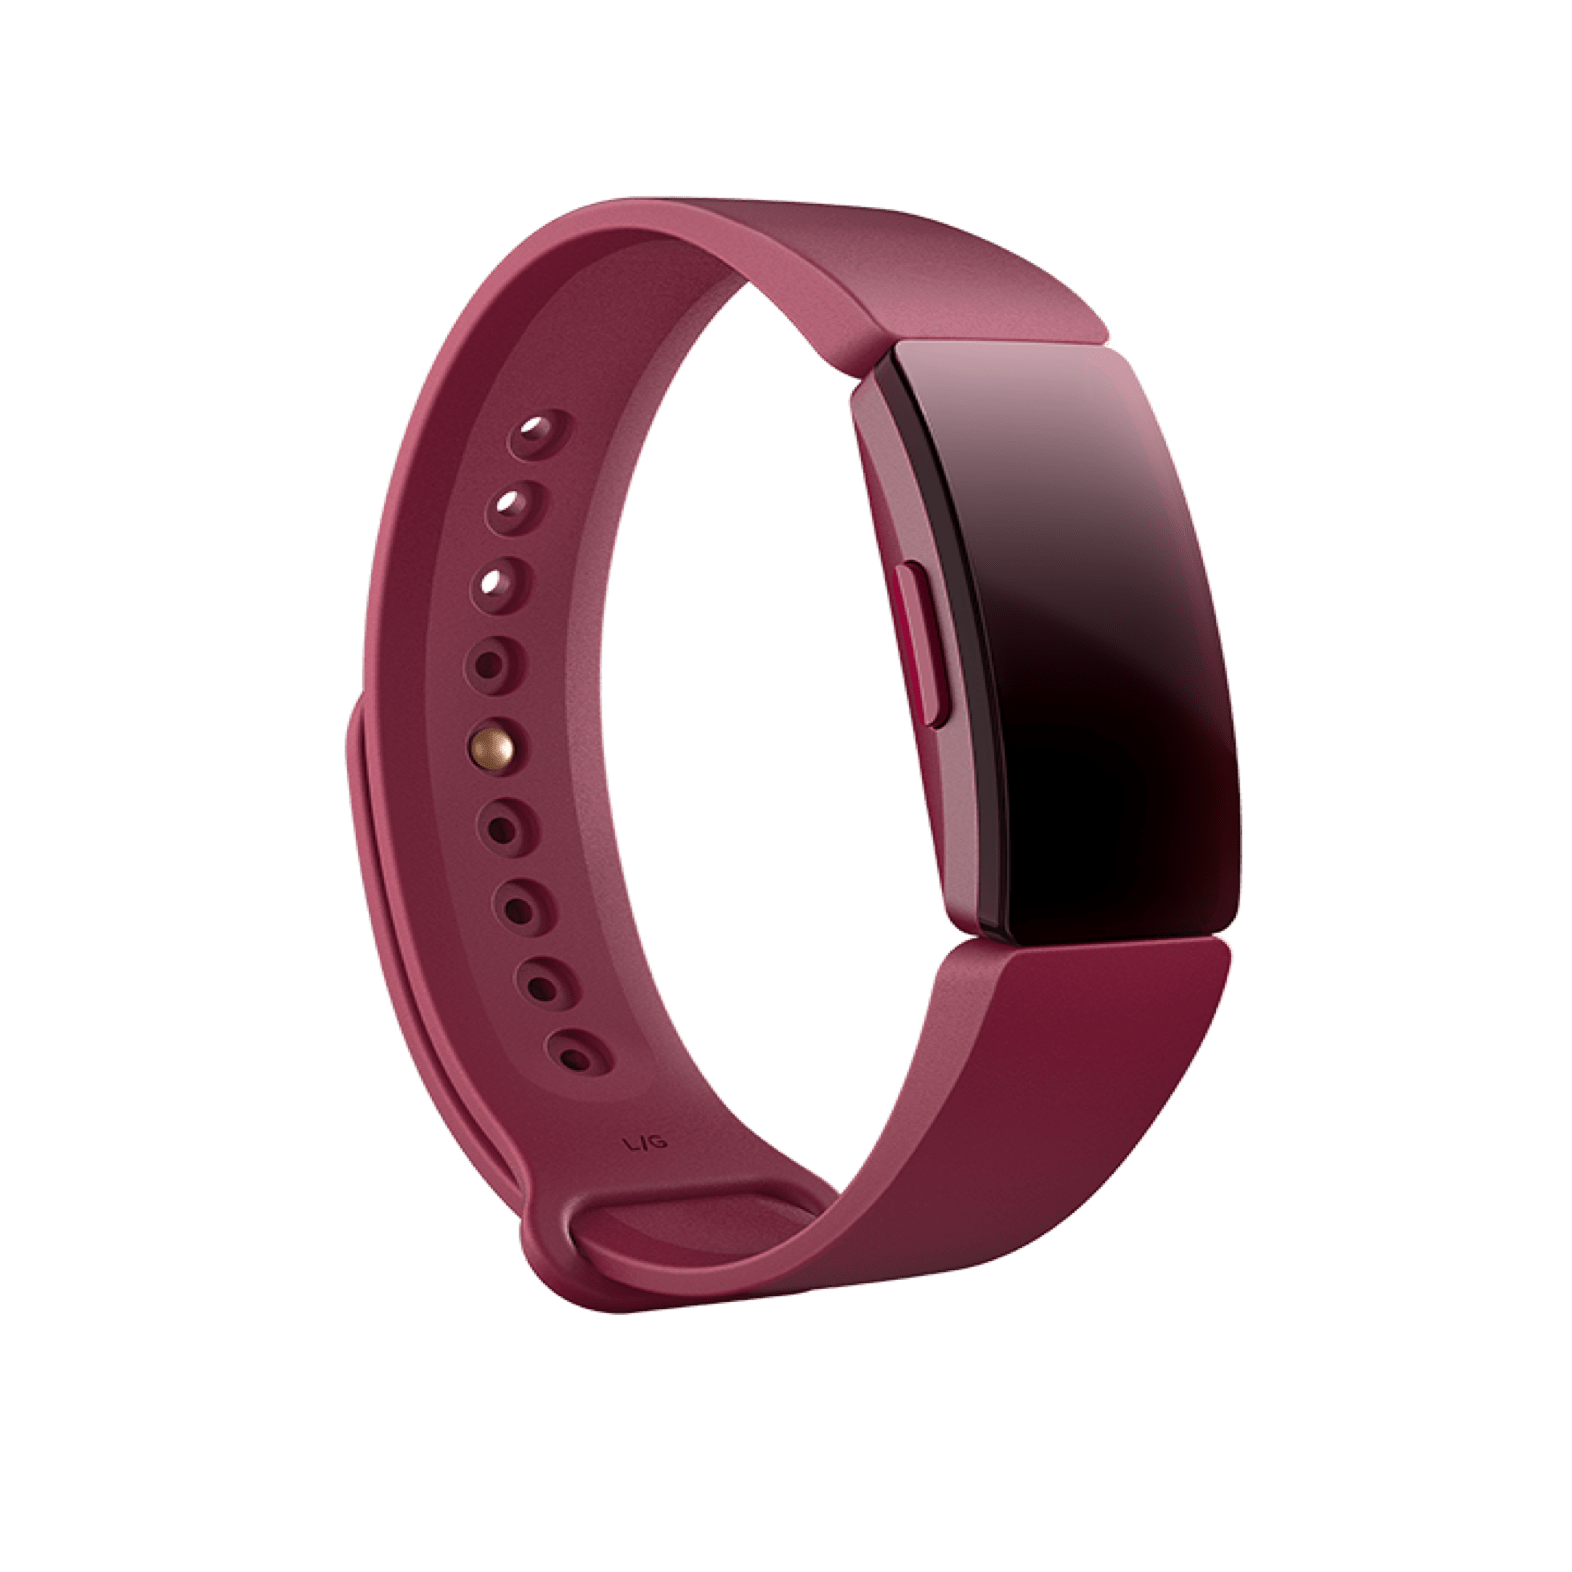 Adjustable Replacement Sport Strap for Fitbit Inspire HR Smatiful Inspire Straps